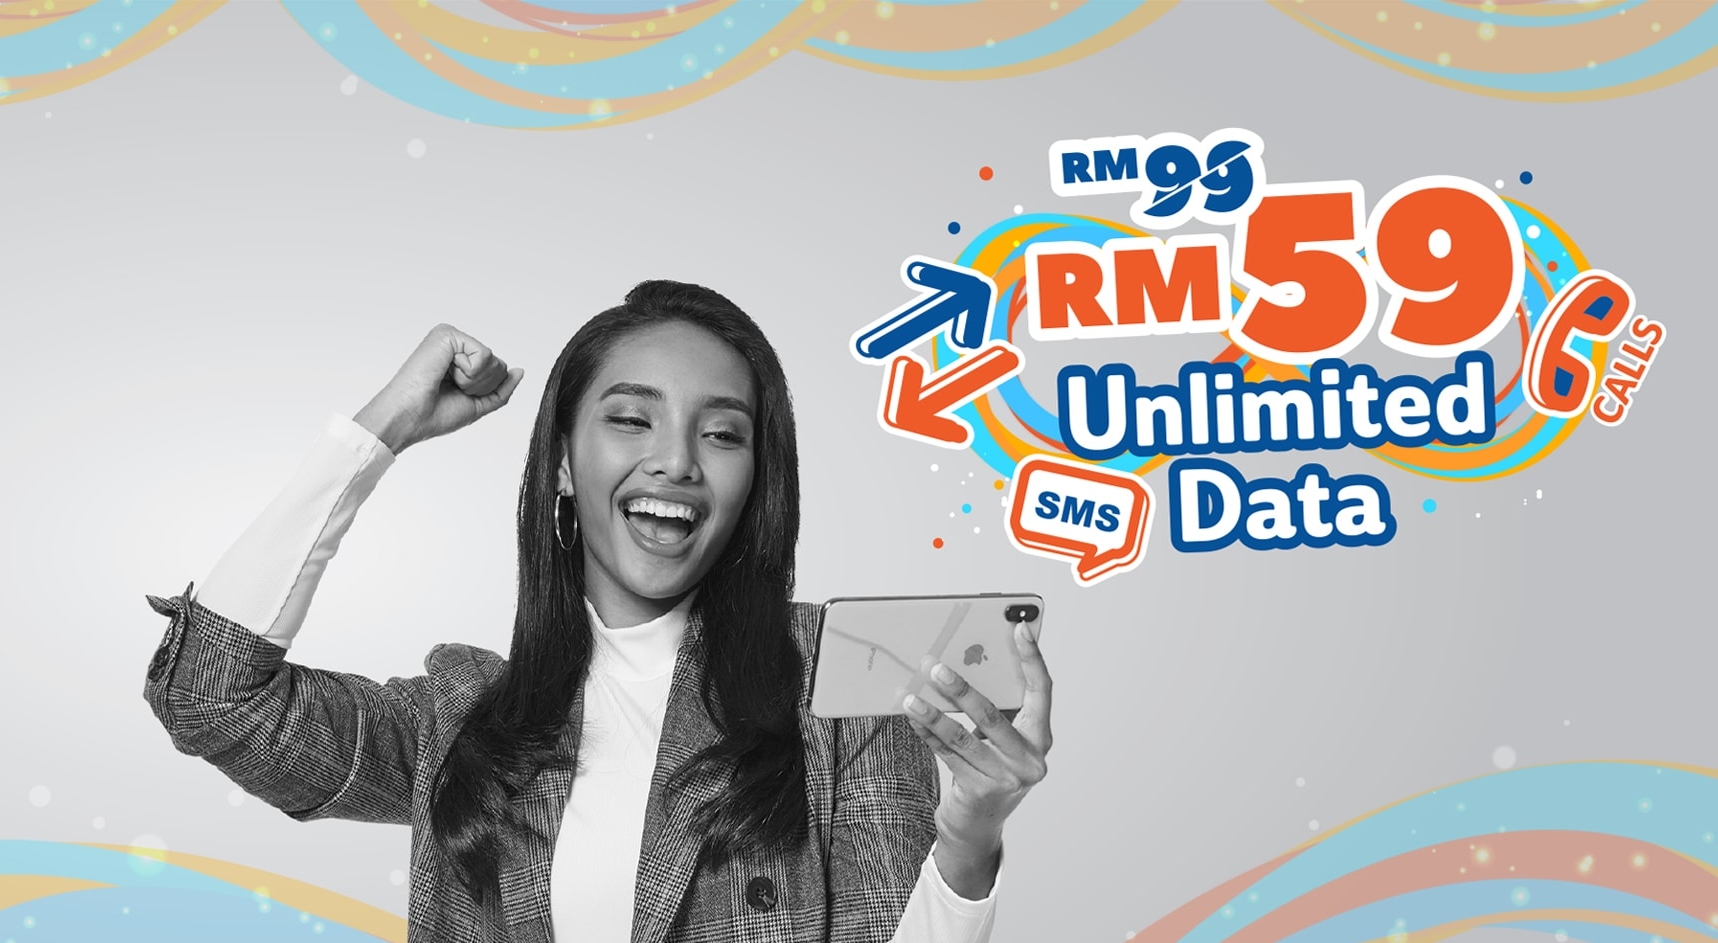 191107 unifi mobile unlimited RM59